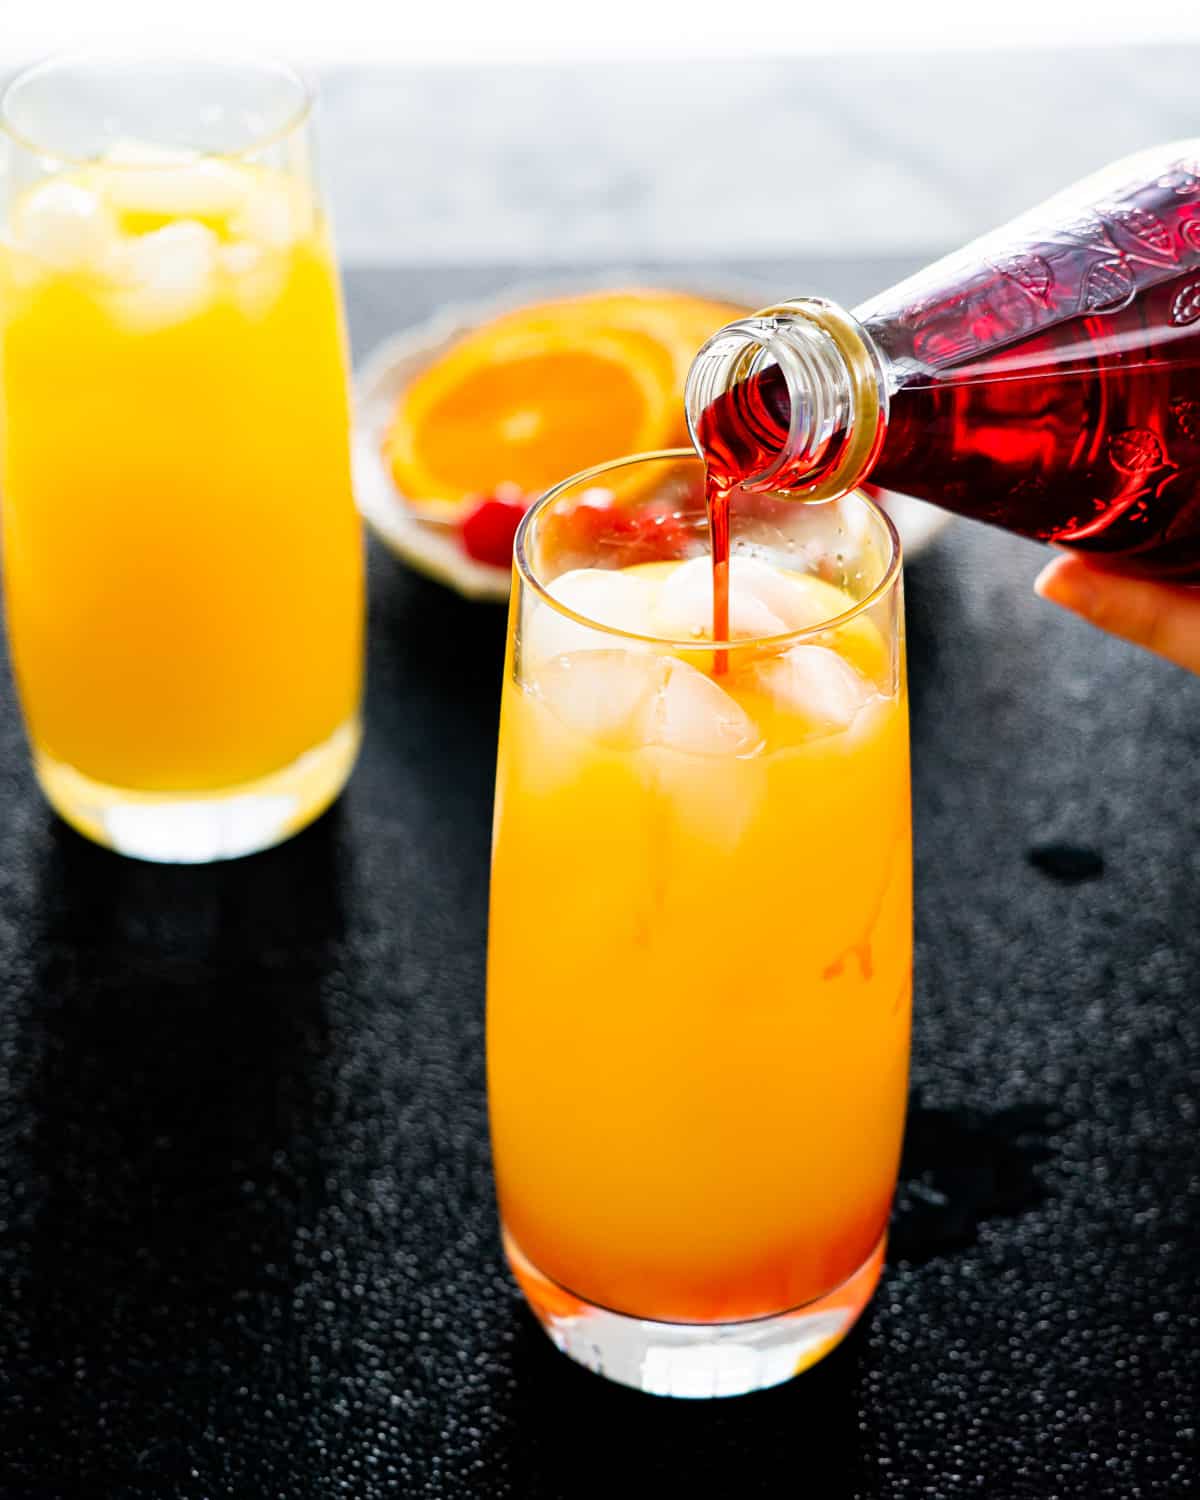 pouring of grenadine in a glass with orange and tequila to make tequila sunrise